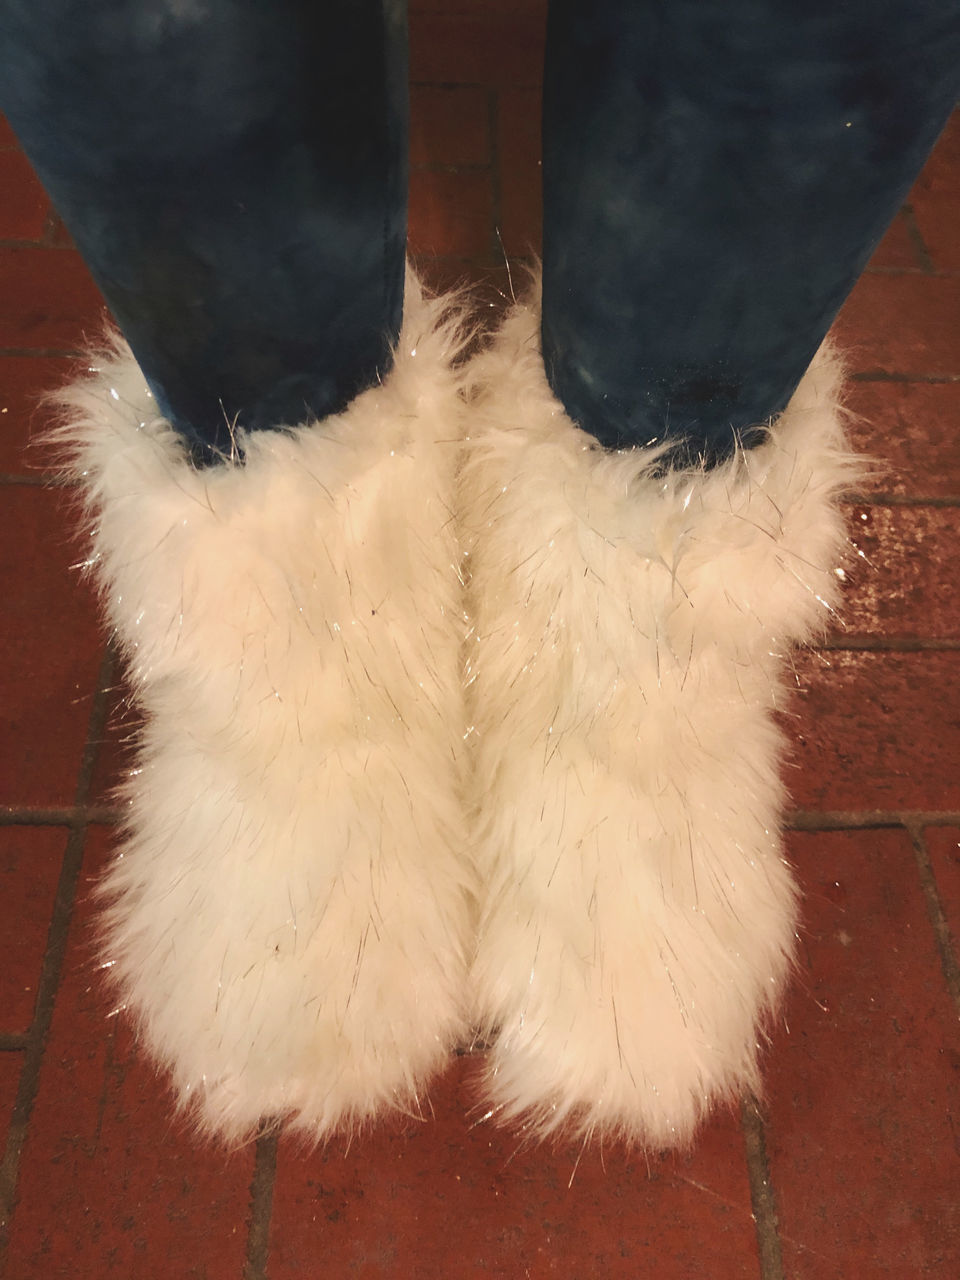 low section, human body part, white color, human leg, high angle view, body part, one person, domestic, animal, domestic animals, mammal, pets, one animal, animal themes, vertebrate, fur, close-up, cat, animal body part, flooring, animal leg, human foot